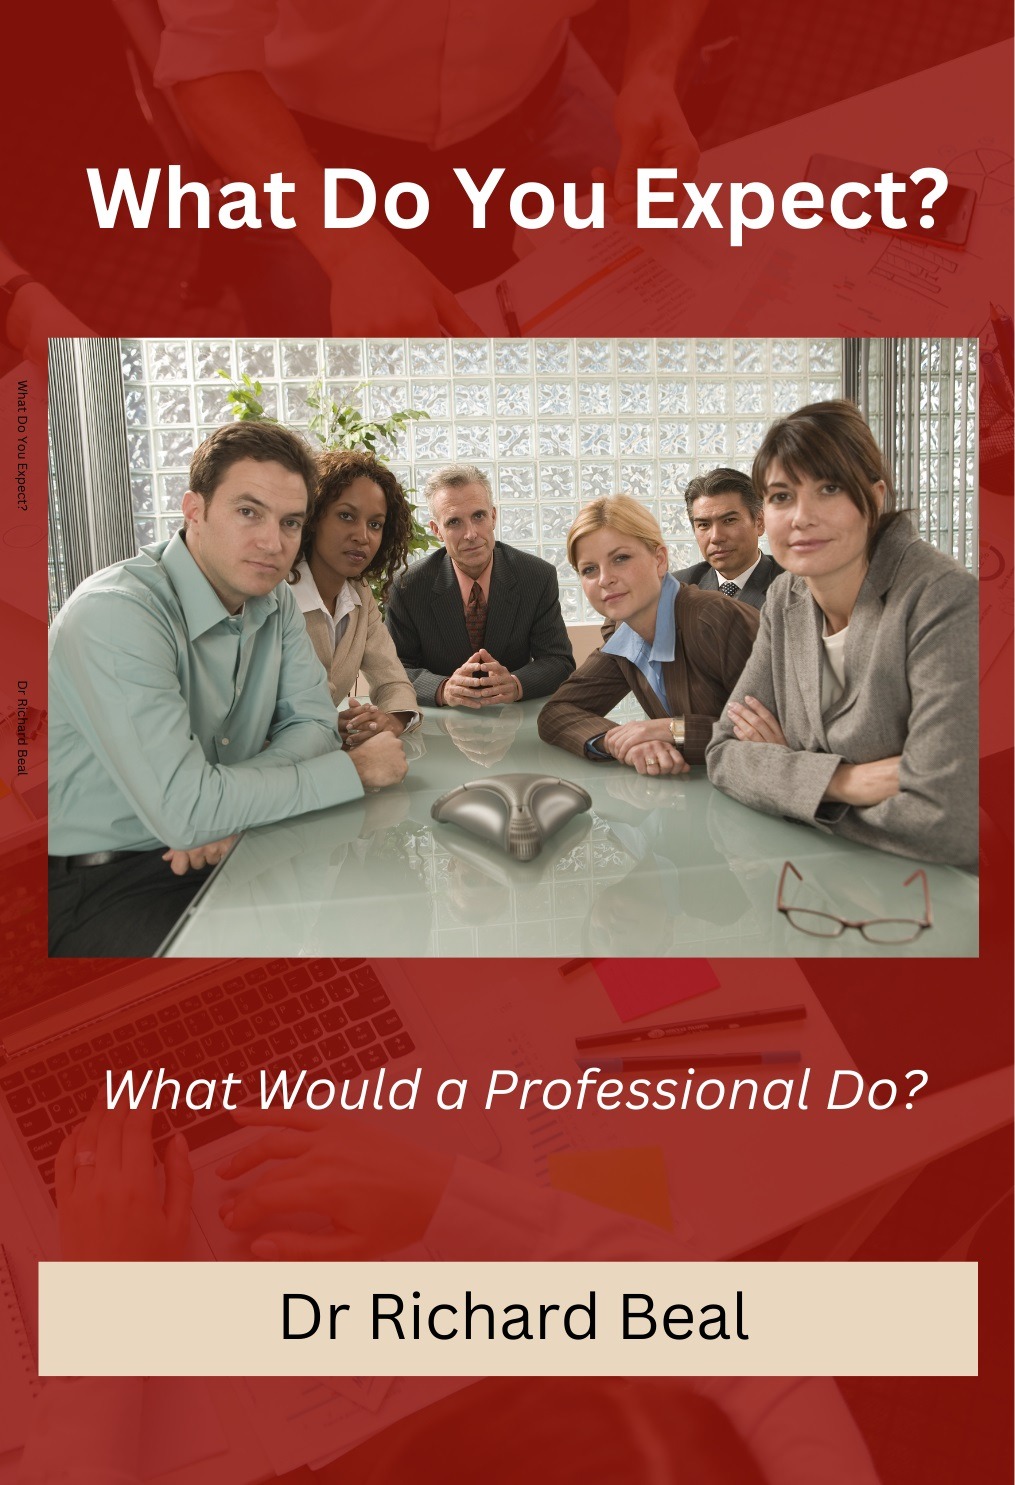 New release! The second eBook in the ‘What Would a Professional Do?’ series!